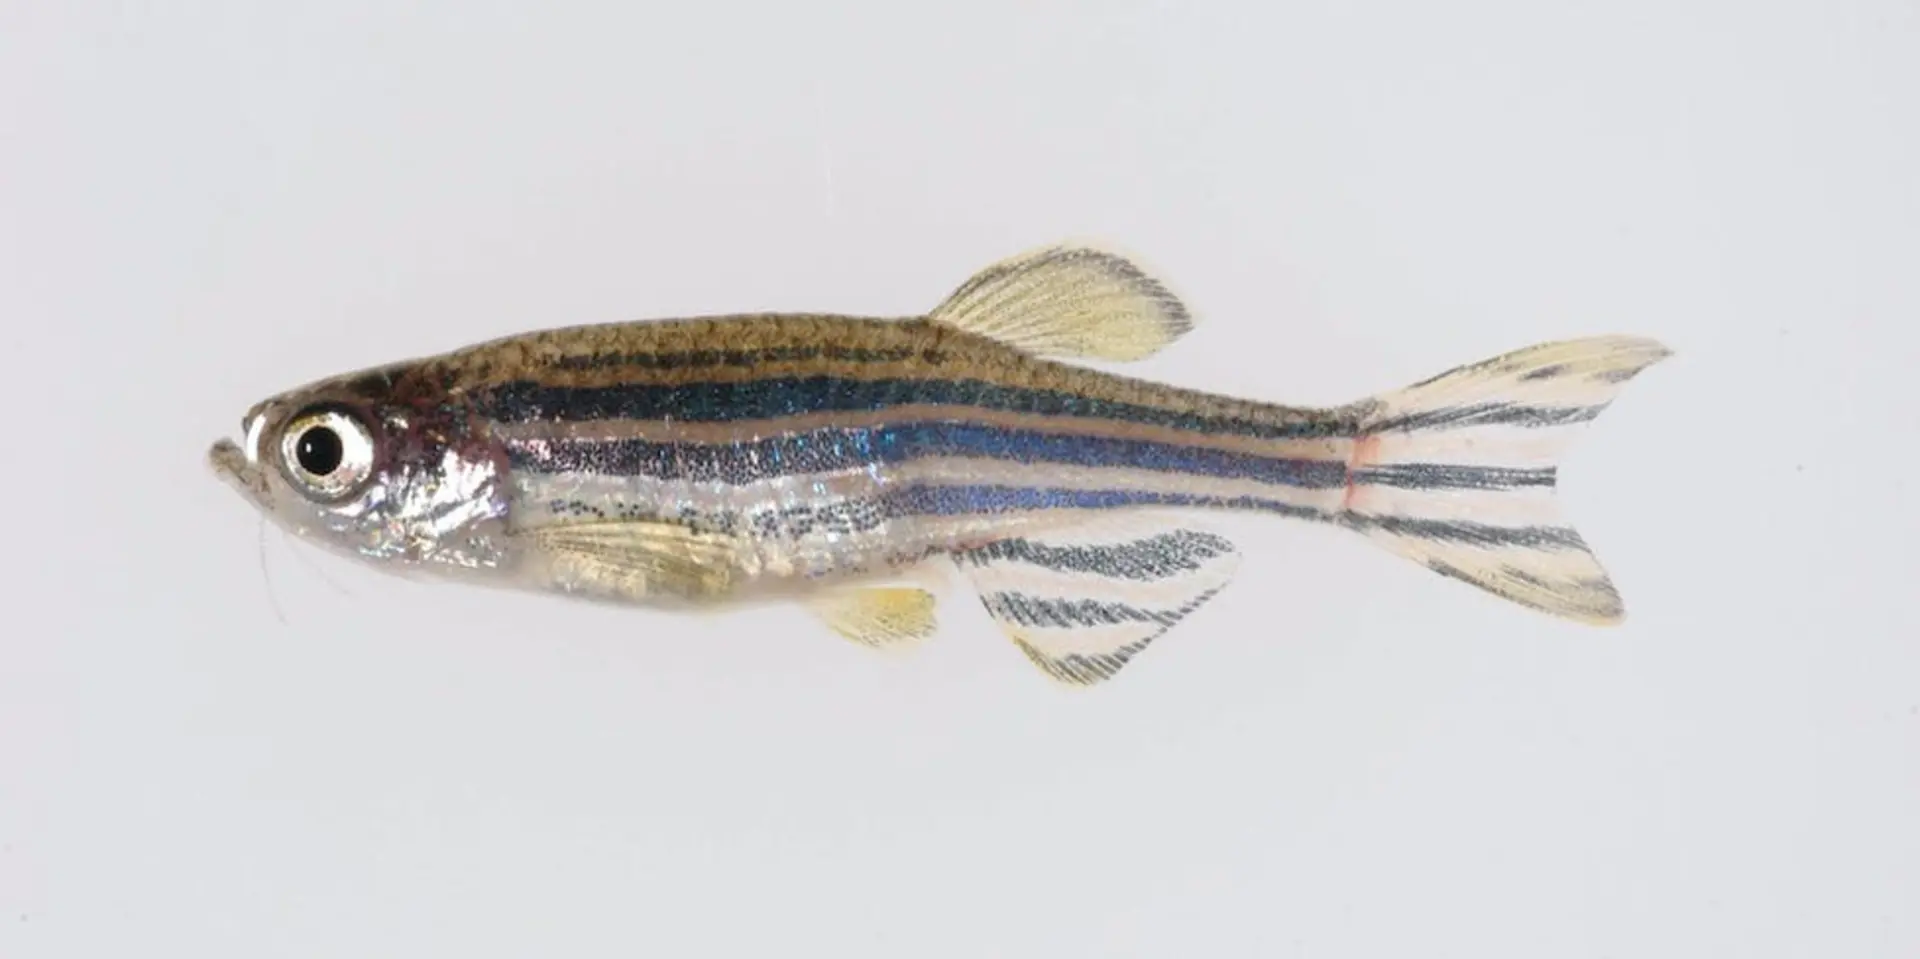 Photograph of the zebrafish (Danio rerio) which is often used as the main fish model organism.